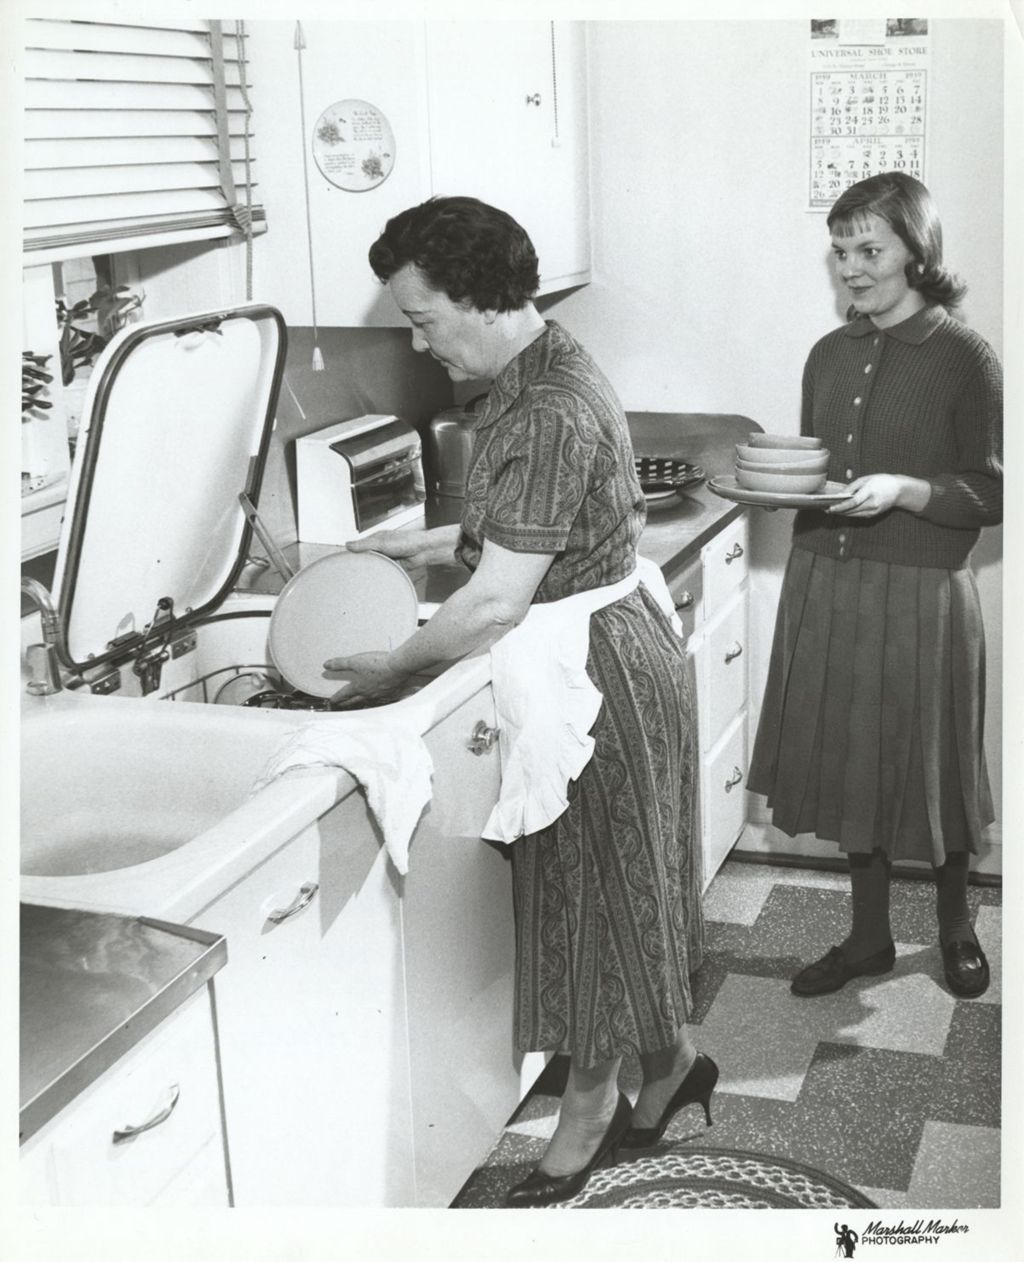 Miniature of Eleanor Daley loading a dishwasher with Patricia Daley